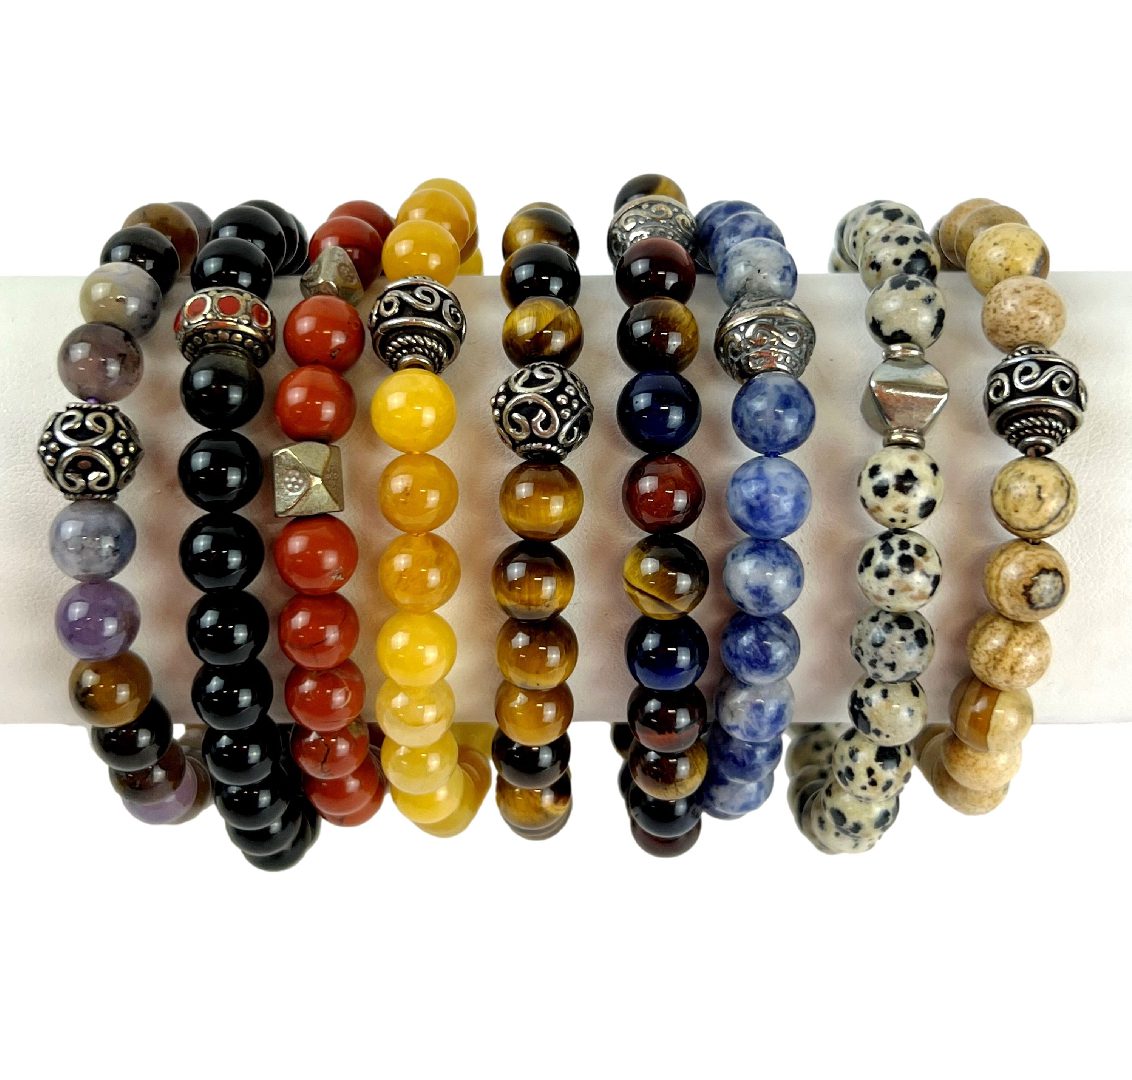 A group of bracelets that are all different colors.